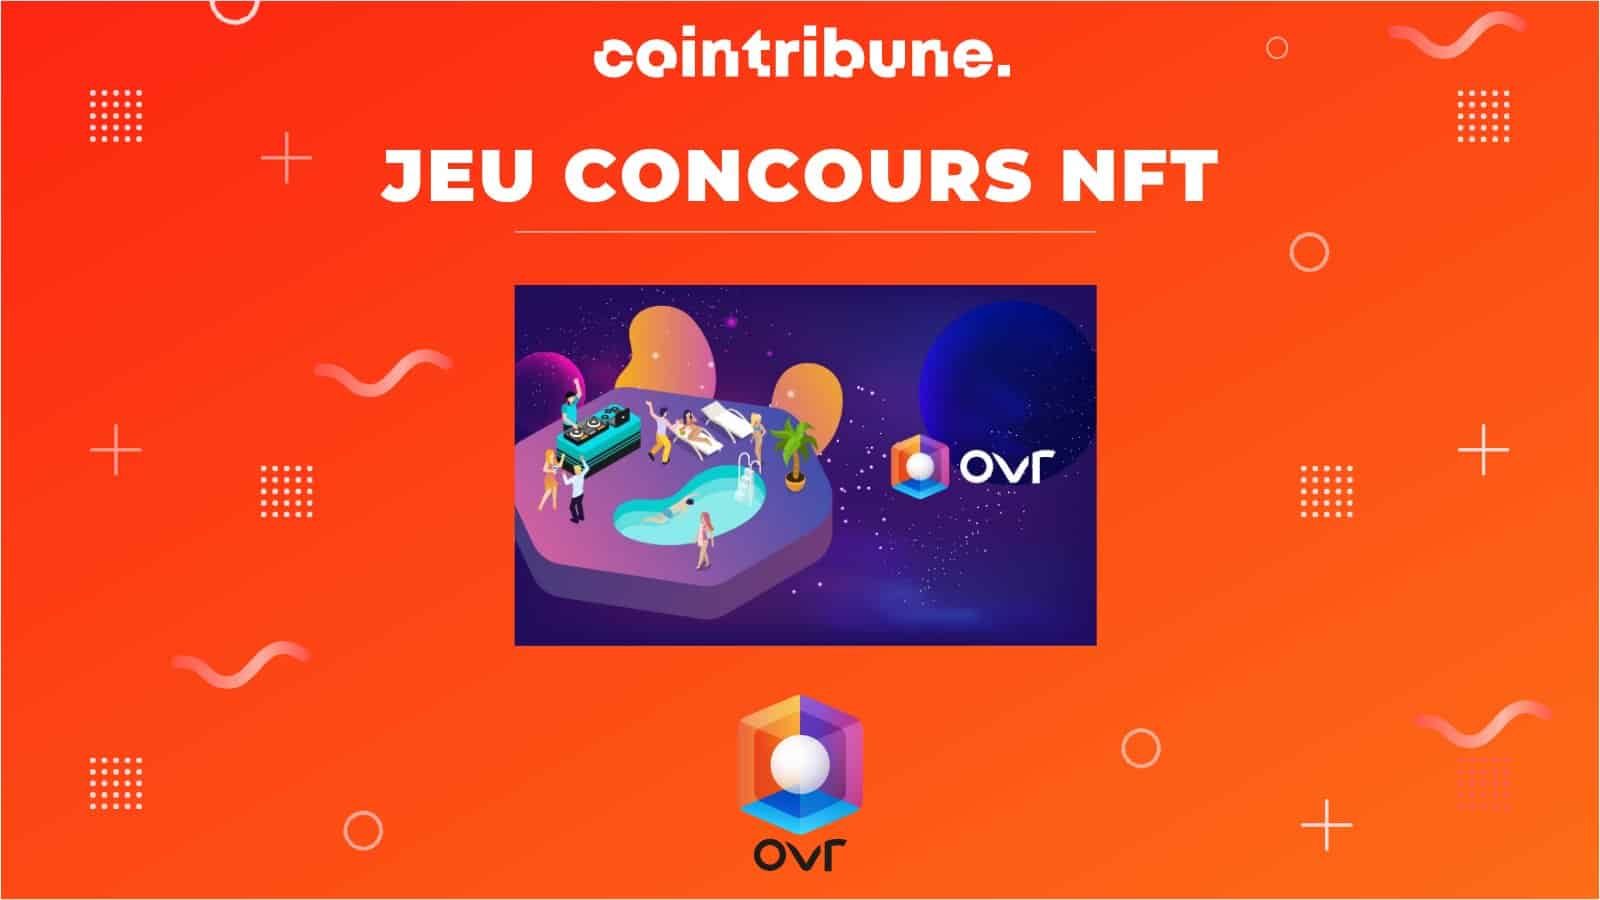 OVR - concours